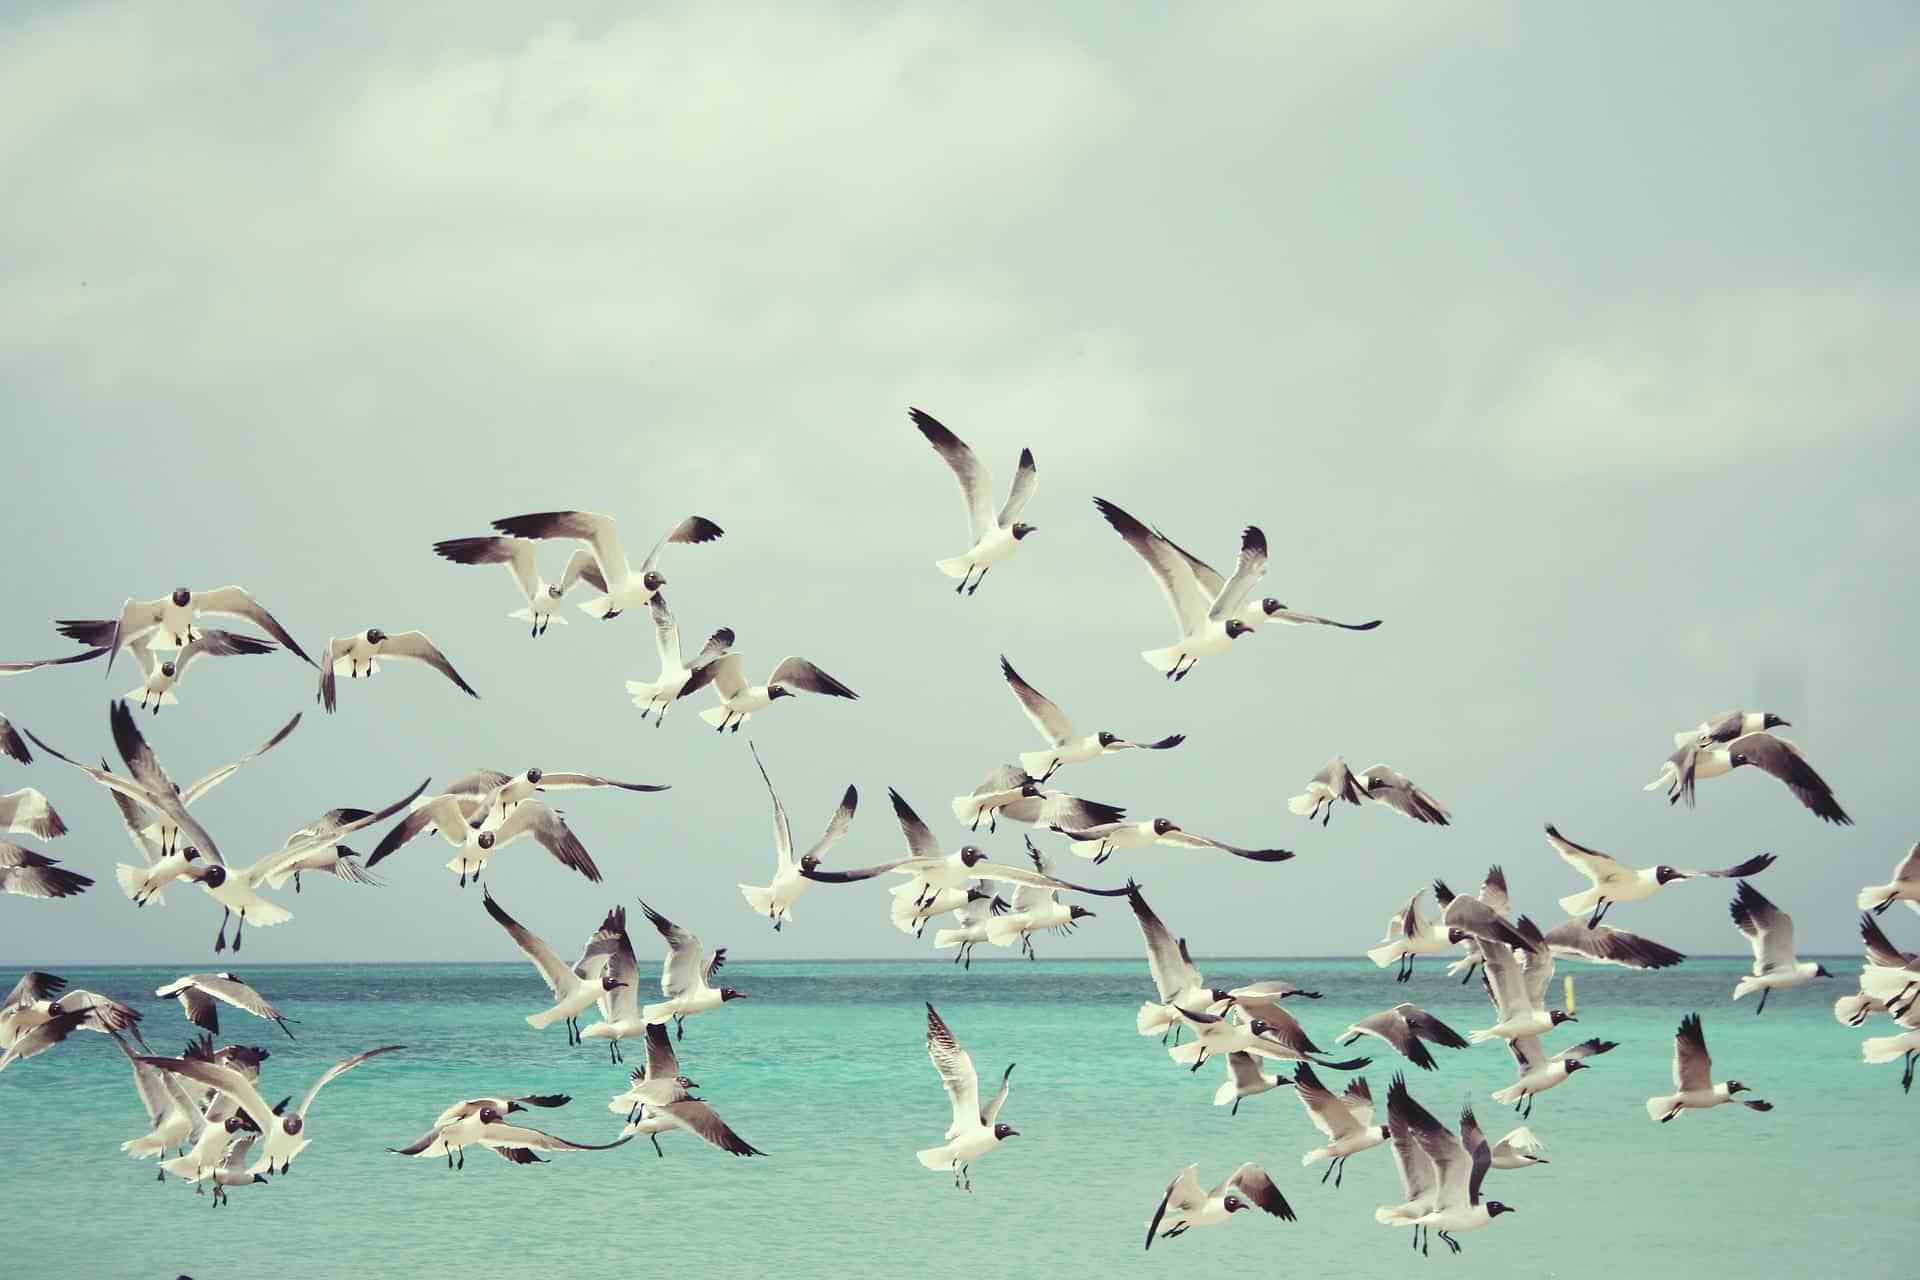 Best Poems on Inspiration on Seagulls flying